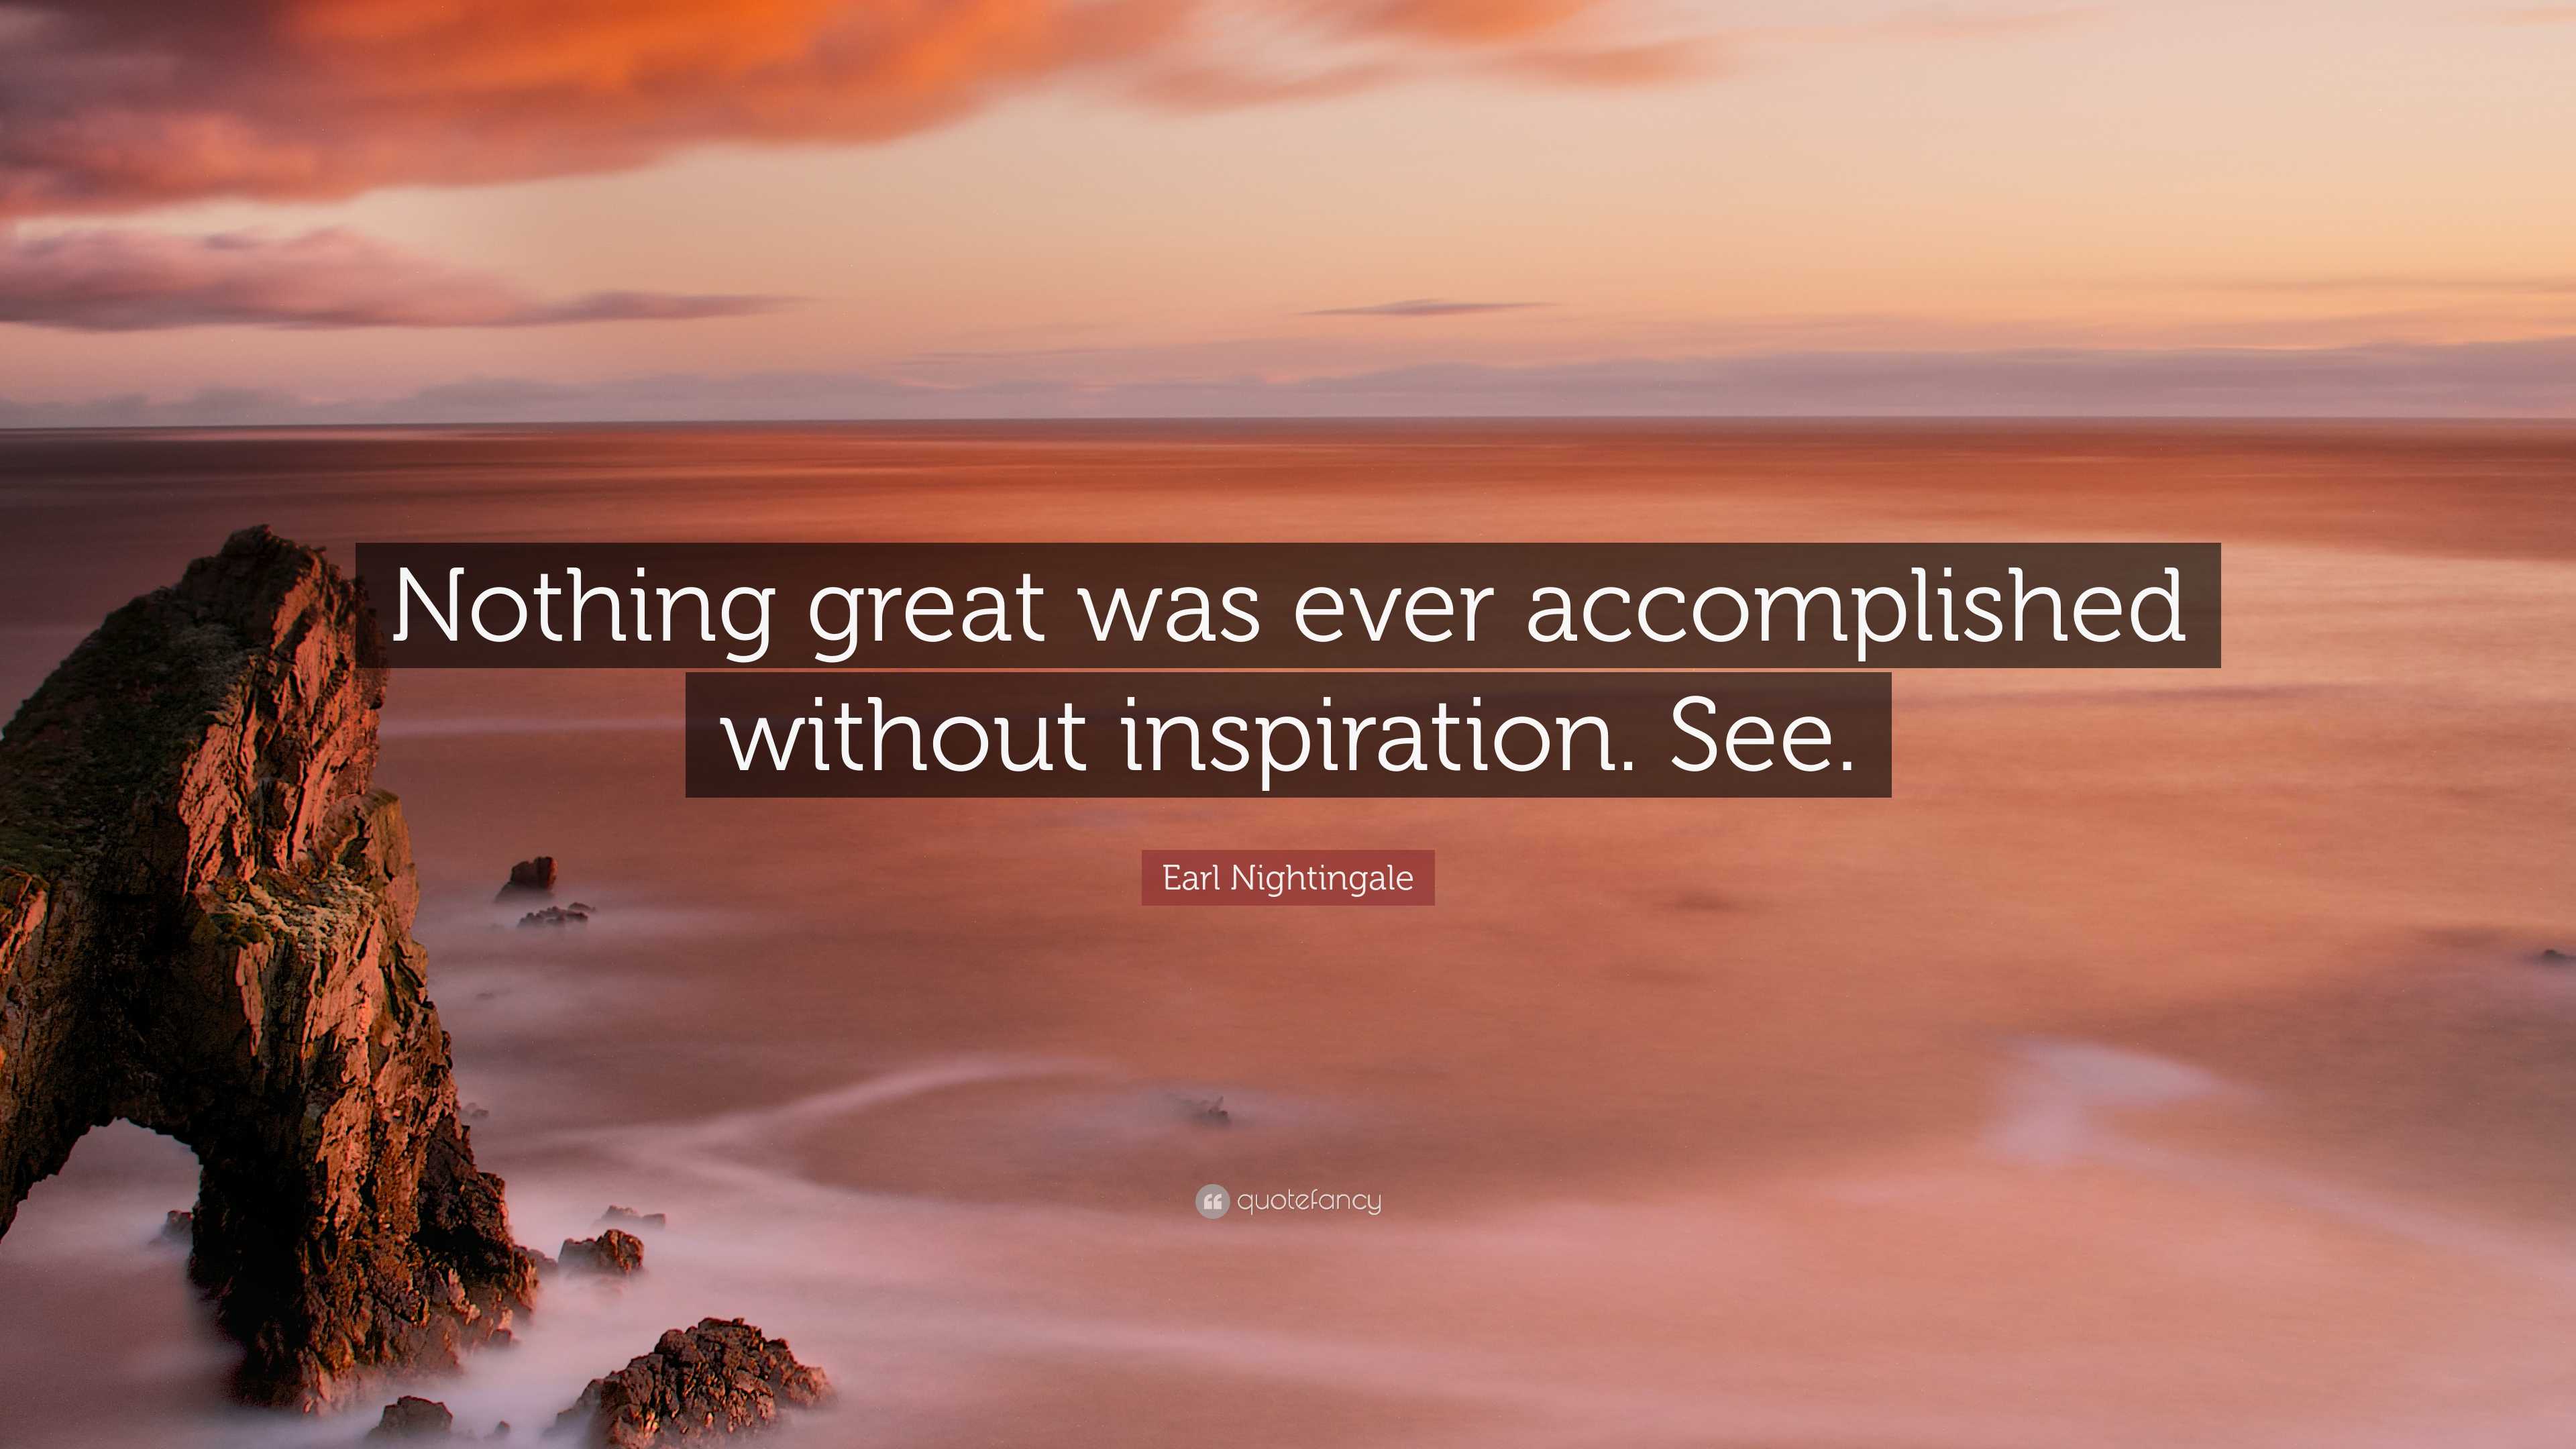 Earl Nightingale Quote: “Nothing great was ever accomplished without ...